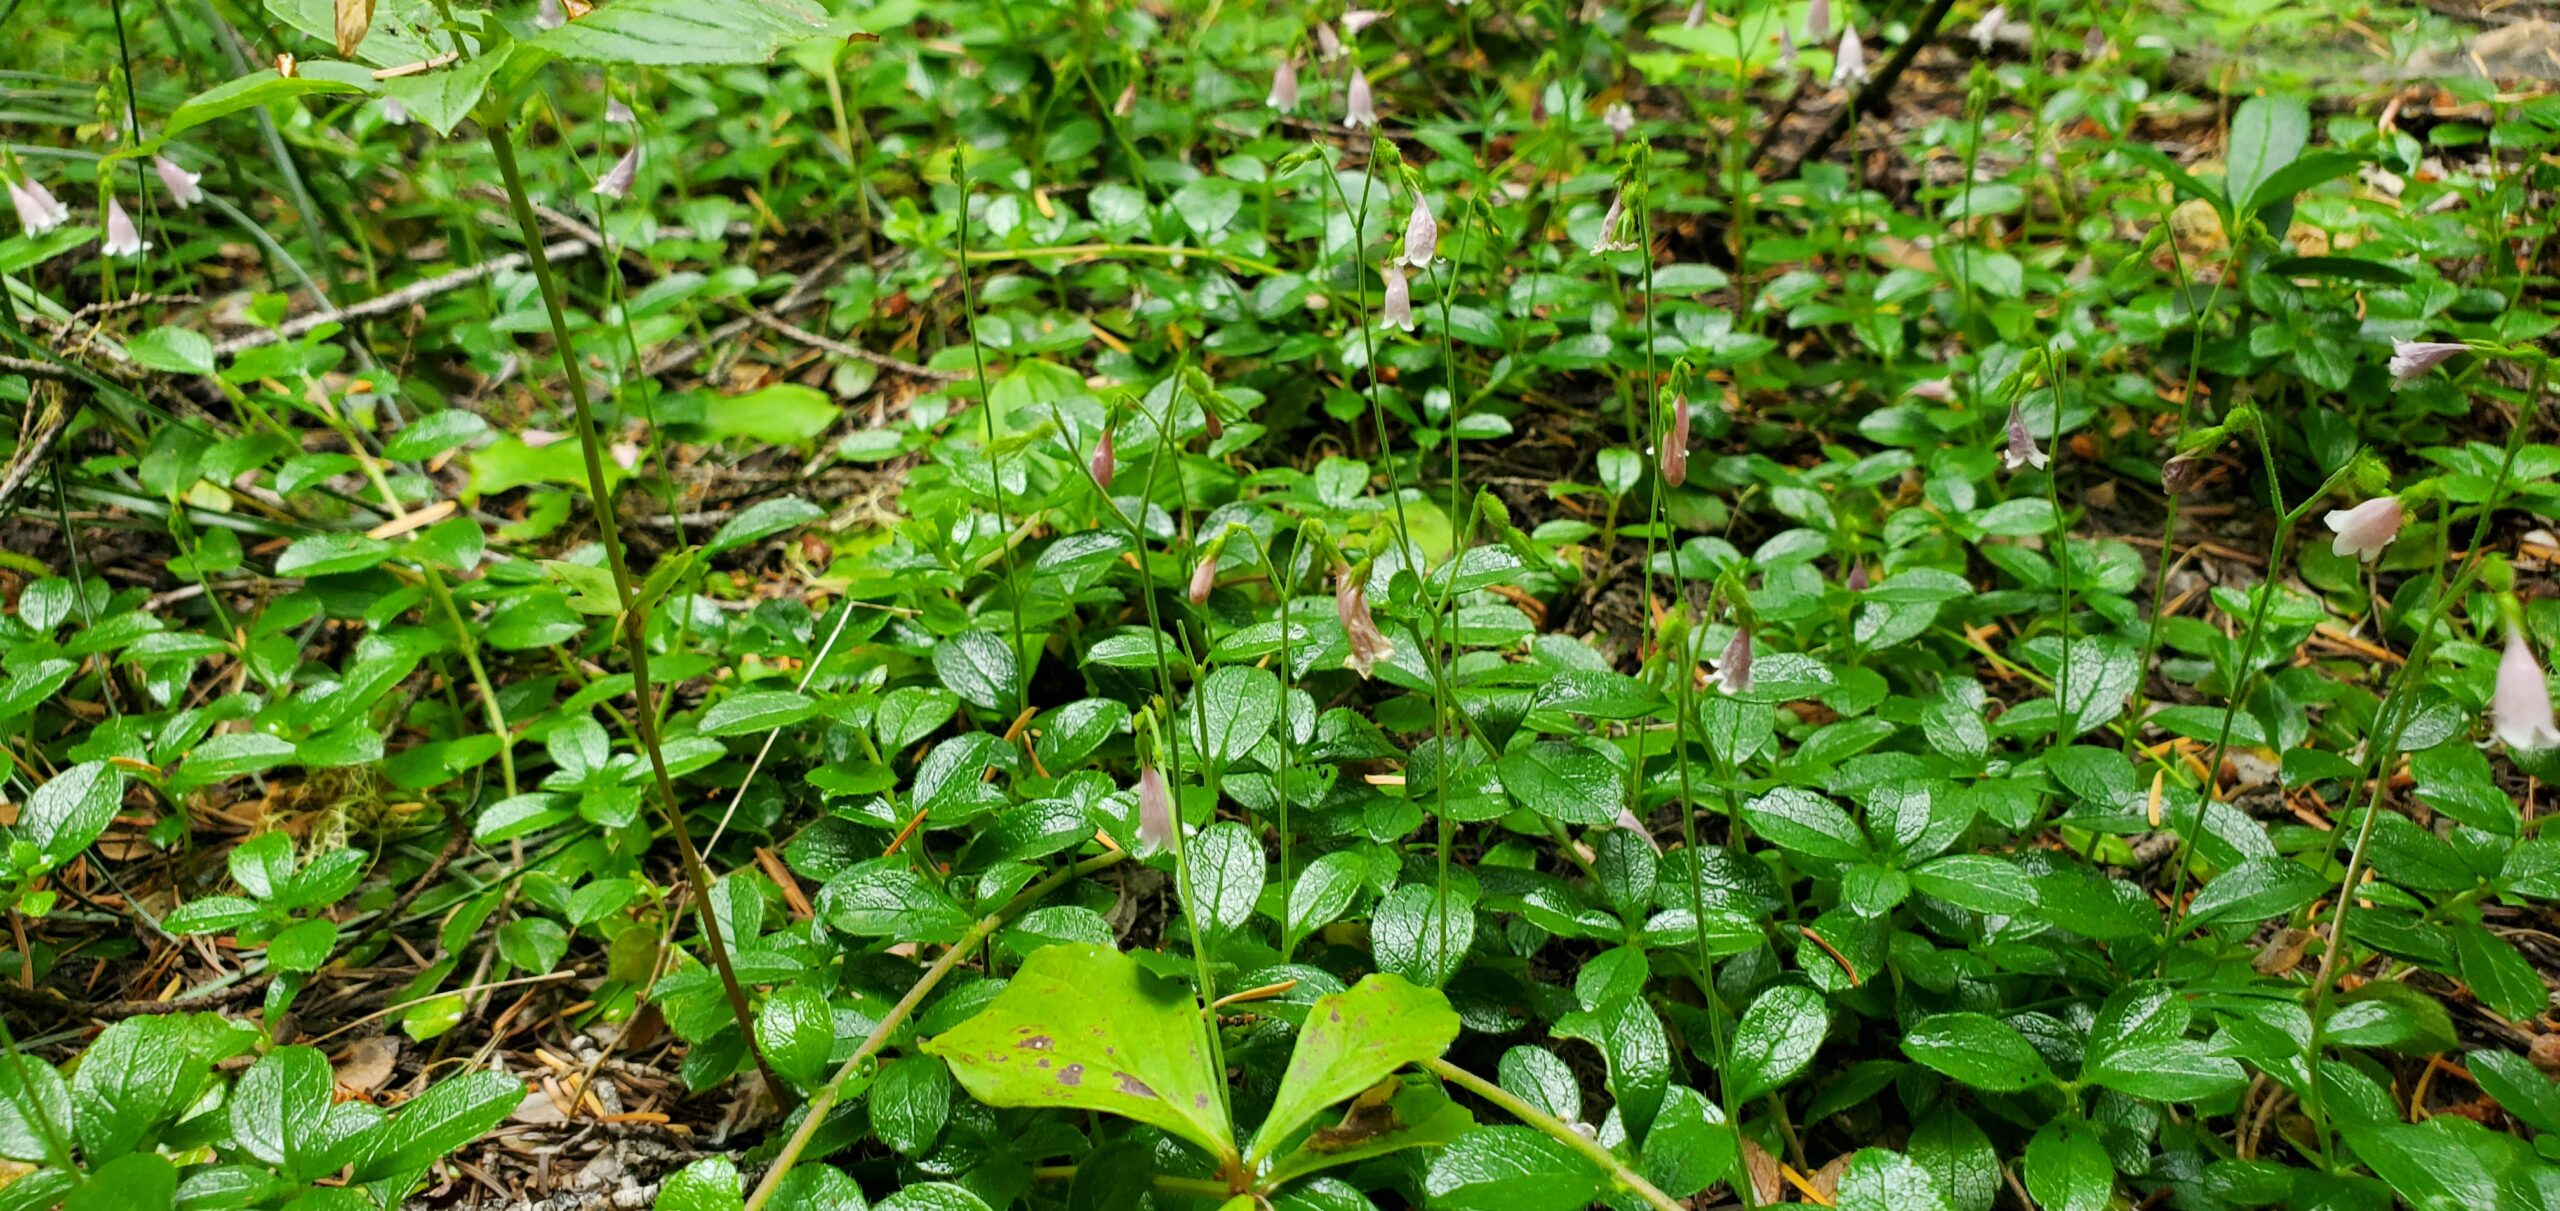 This is a close up of the groundcover near a wetland. There are bright green leaves, one plant covering the ground and another set of leaves which belong to a droopy purple flower.